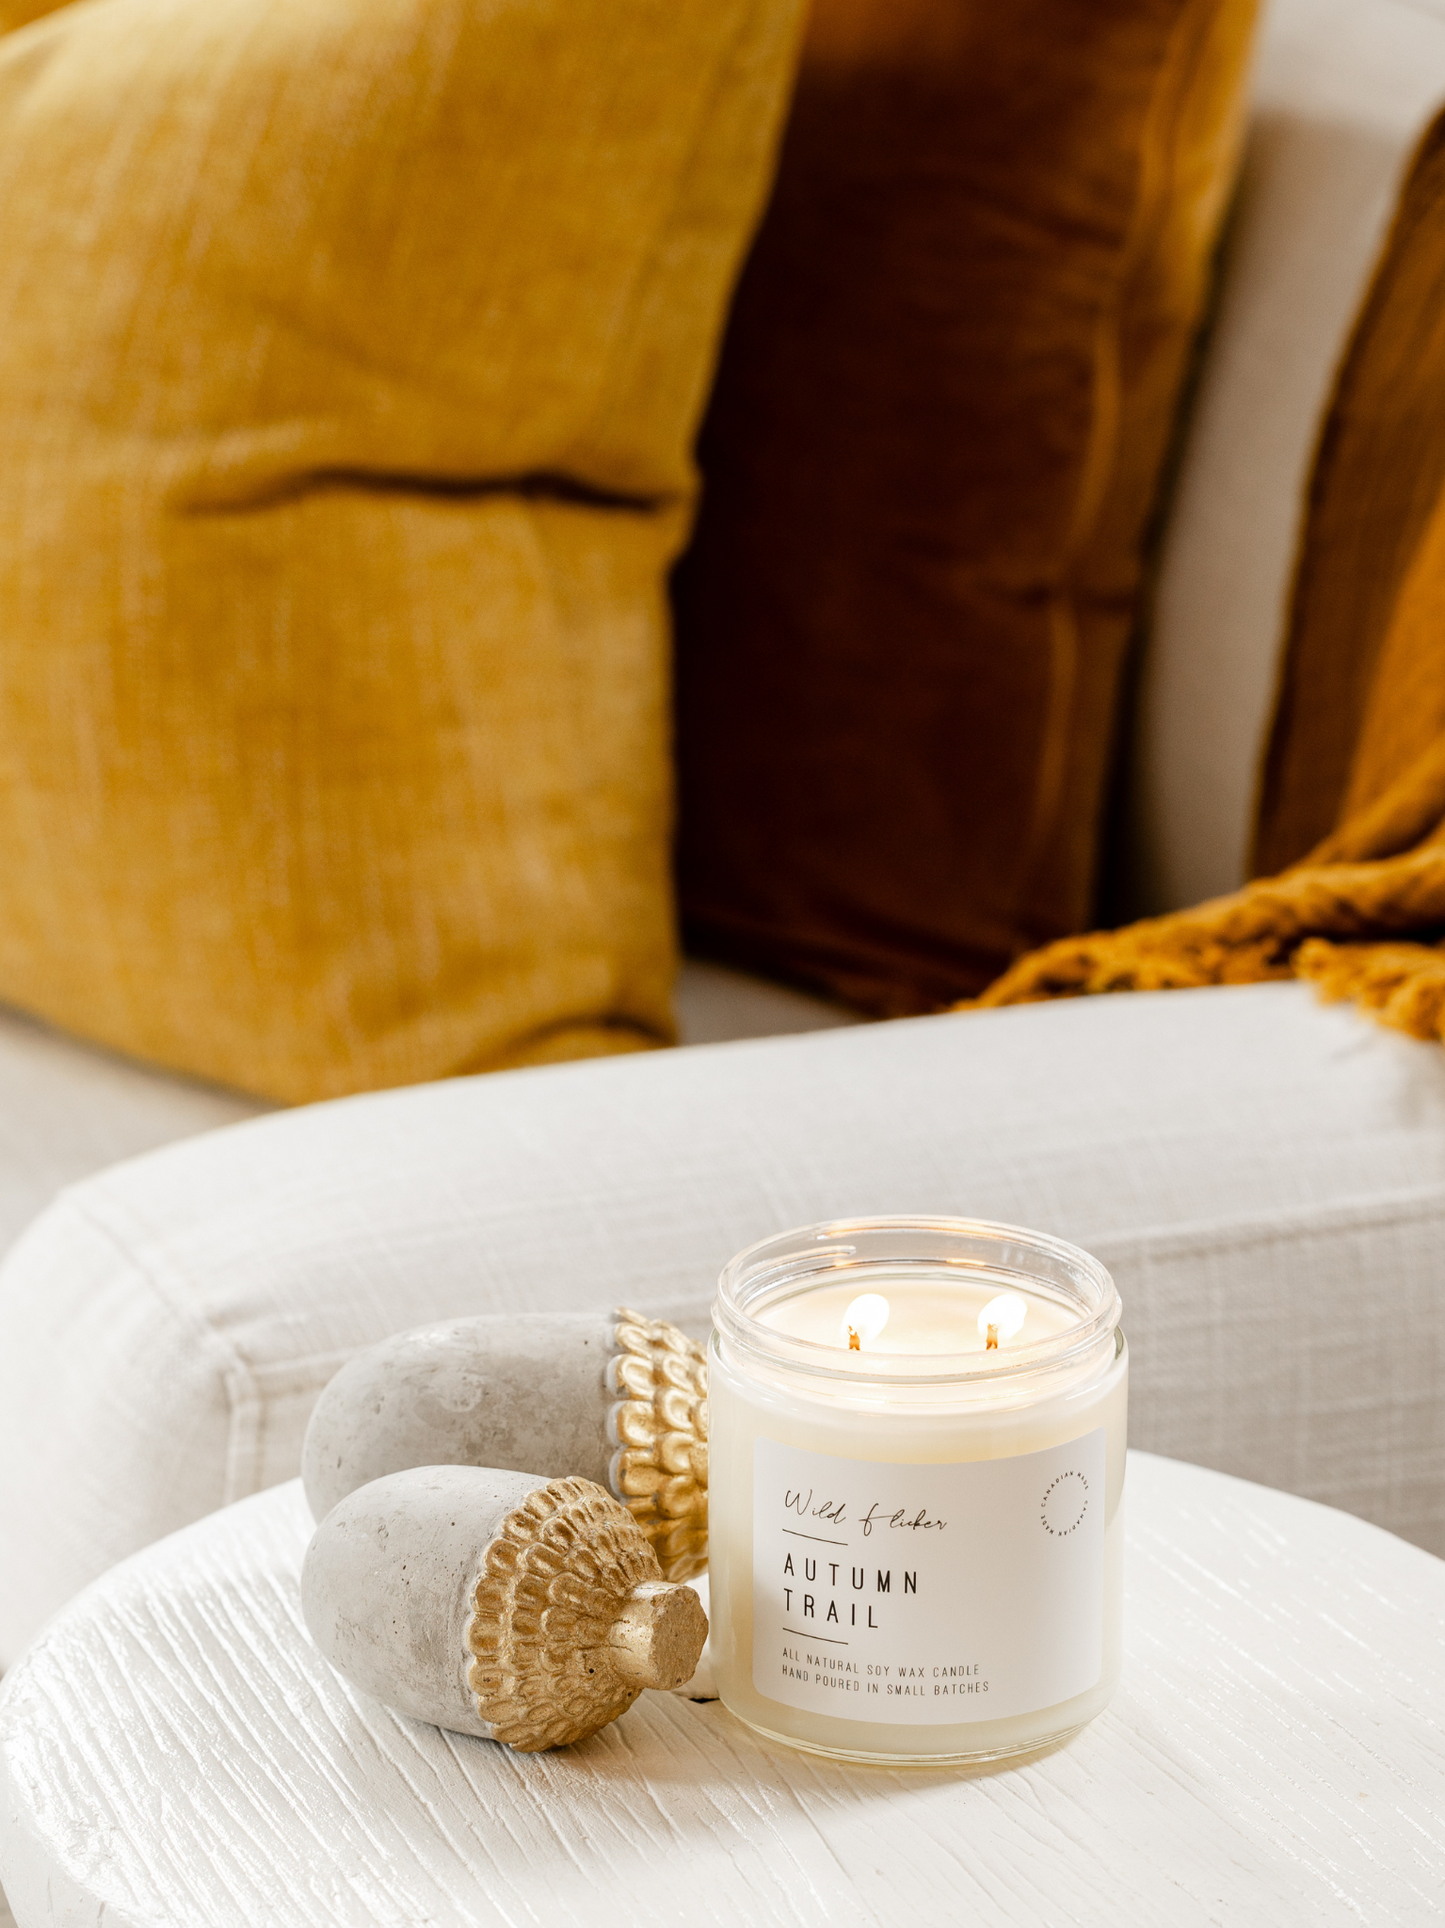 Autumn Trail Soy Wax Candle